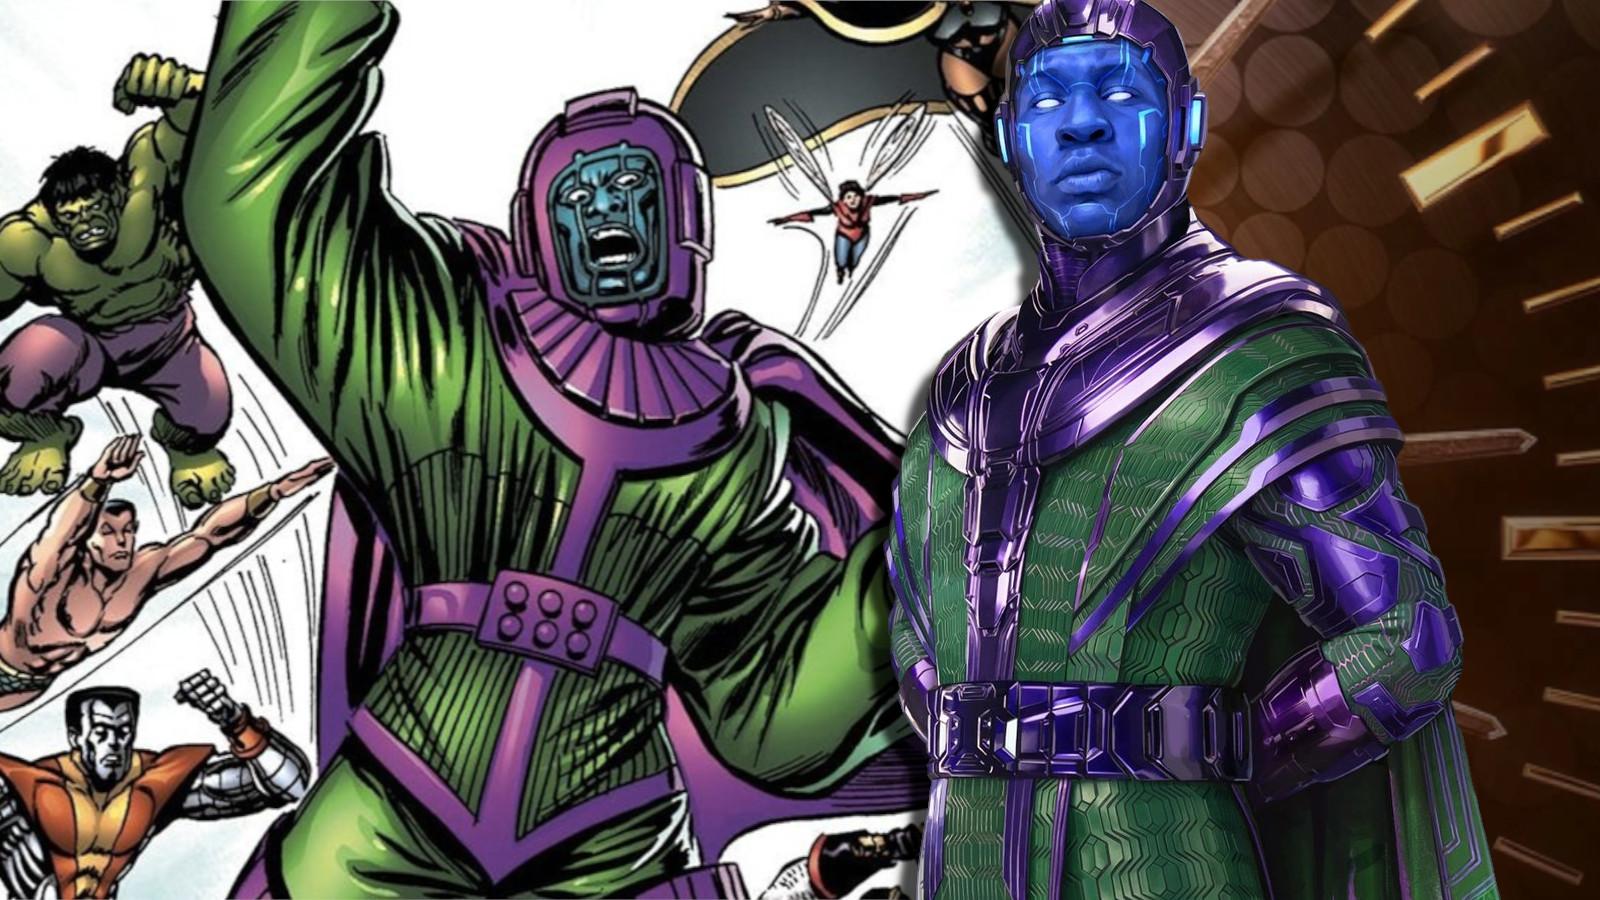 Kang the Conqueror in the MCU and Marvel Comics